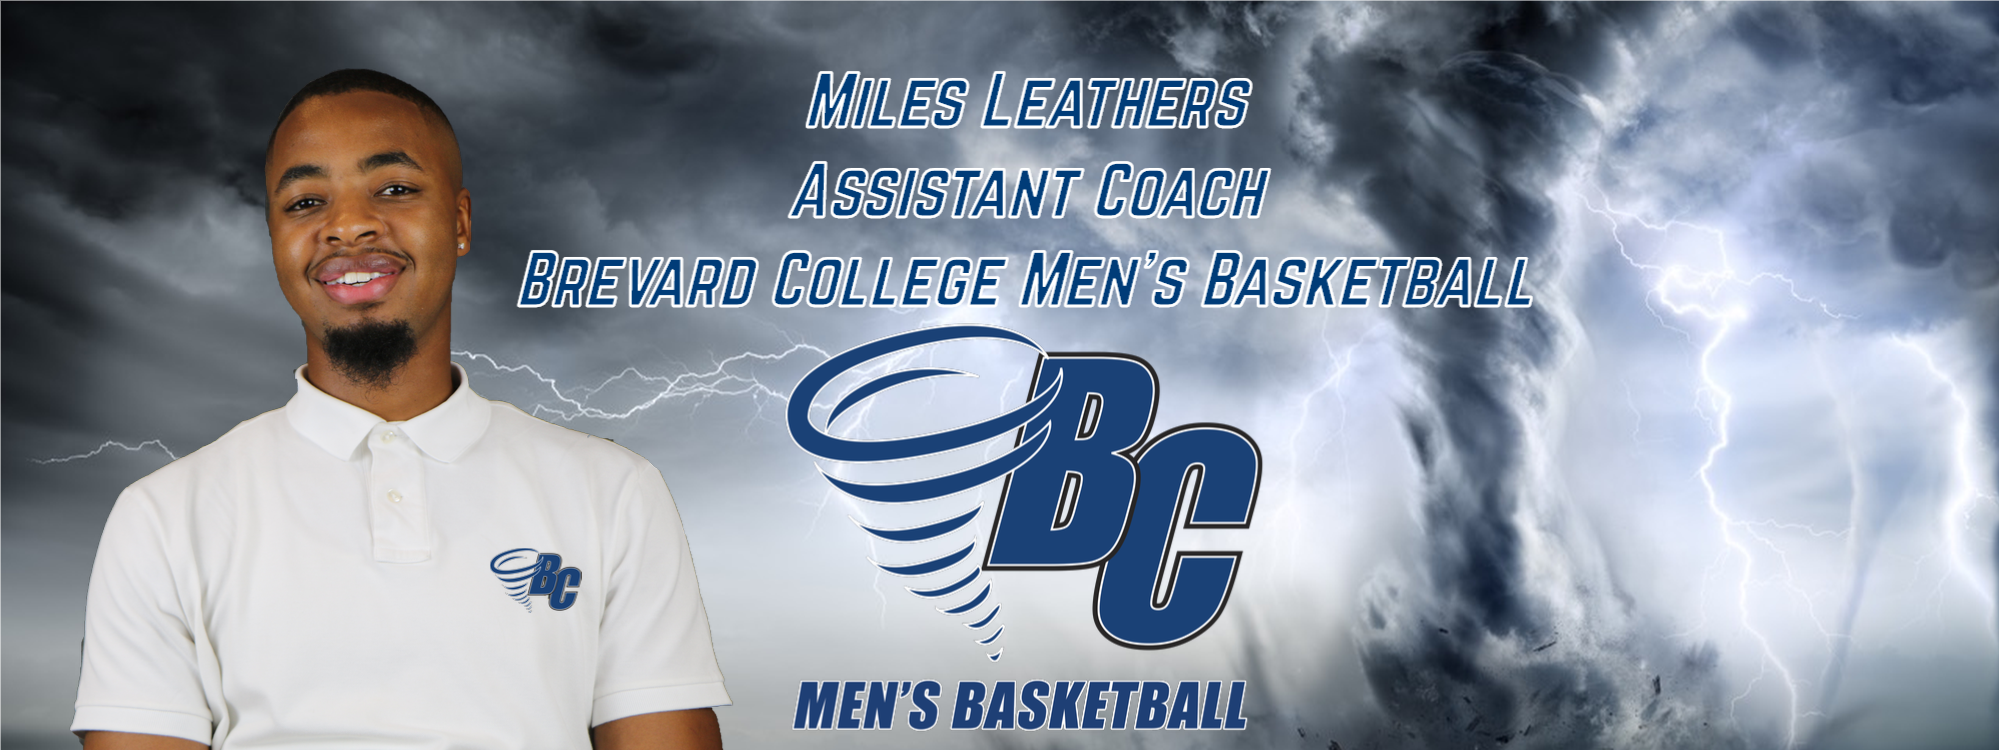 Miles Leathers Named Brevard College Men’s Basketball Assistant Coach